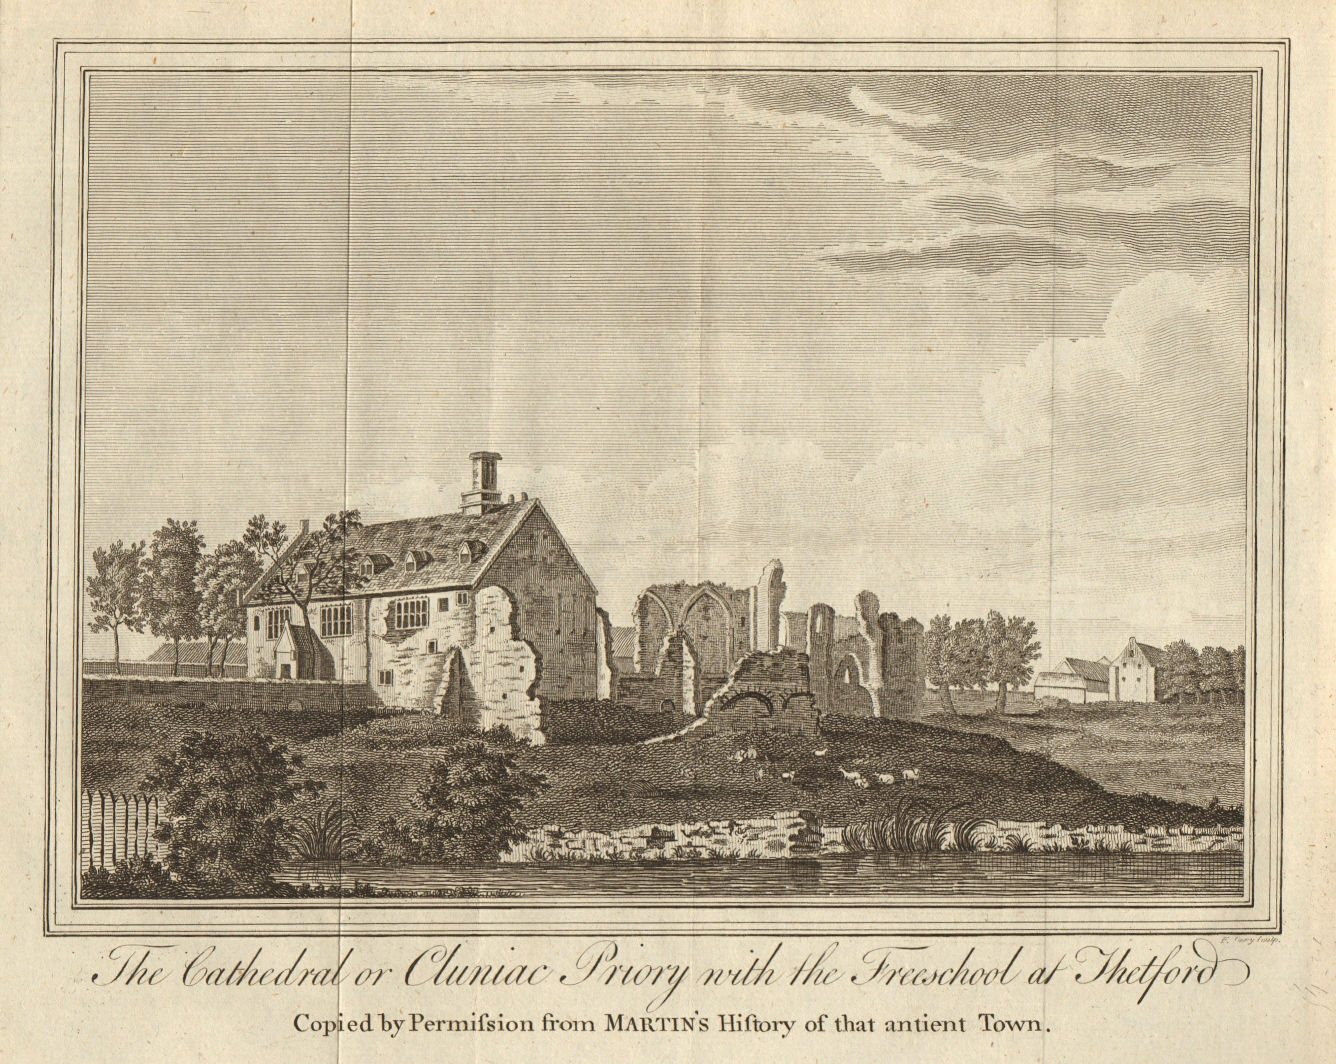 The Cathedral or Cluniac Priory with the Freeschool at Thetford, Norfolk 1780